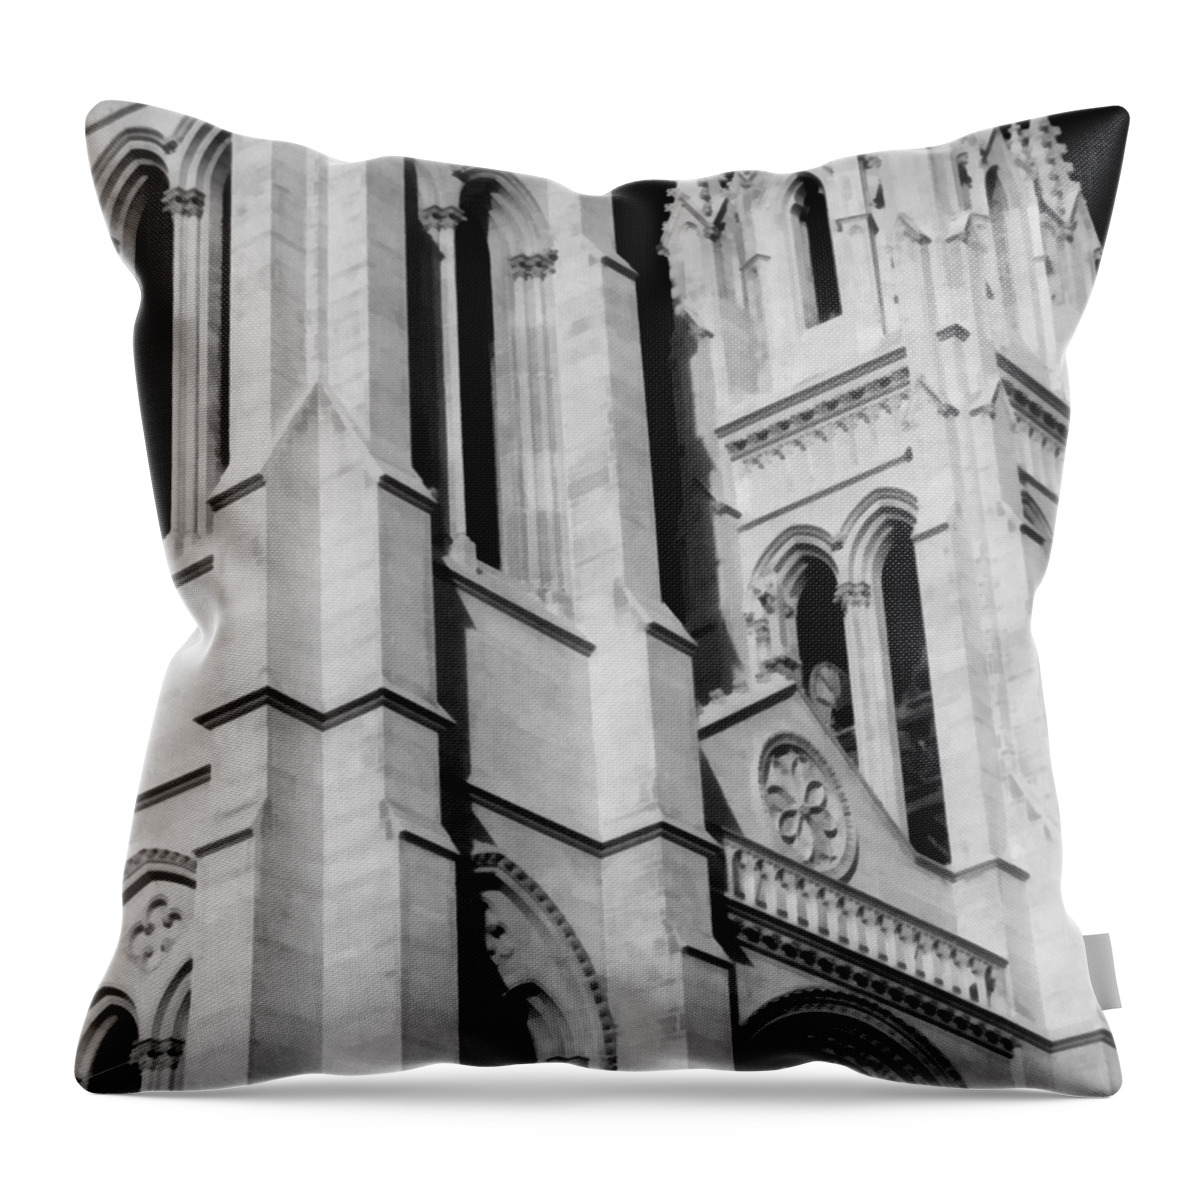 The Heights Of The Cathedral Basilica Of The Immaculate Conception Throw Pillow featuring the photograph The Heights Of The Cathedral Basilica of the Immaculate Conception BW by Angelina Tamez